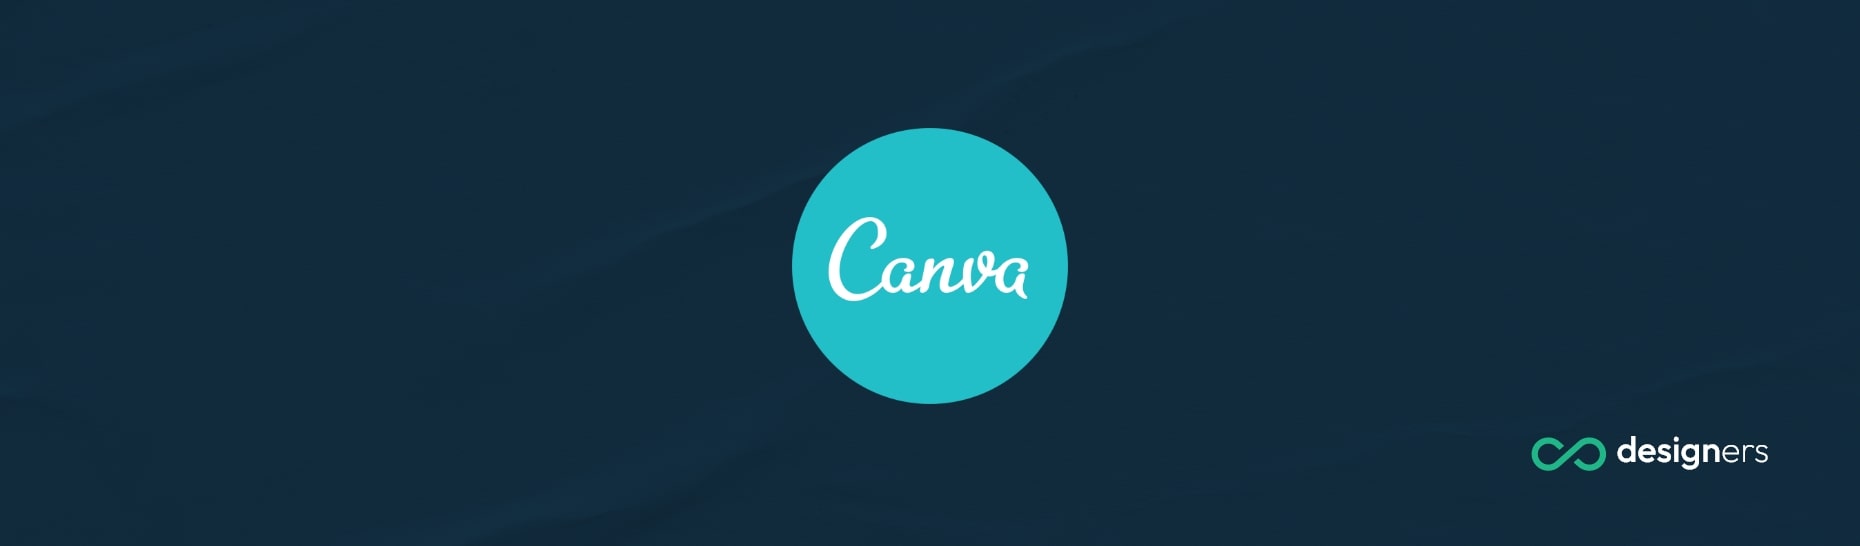 Does Canva Offer a Printing Service?